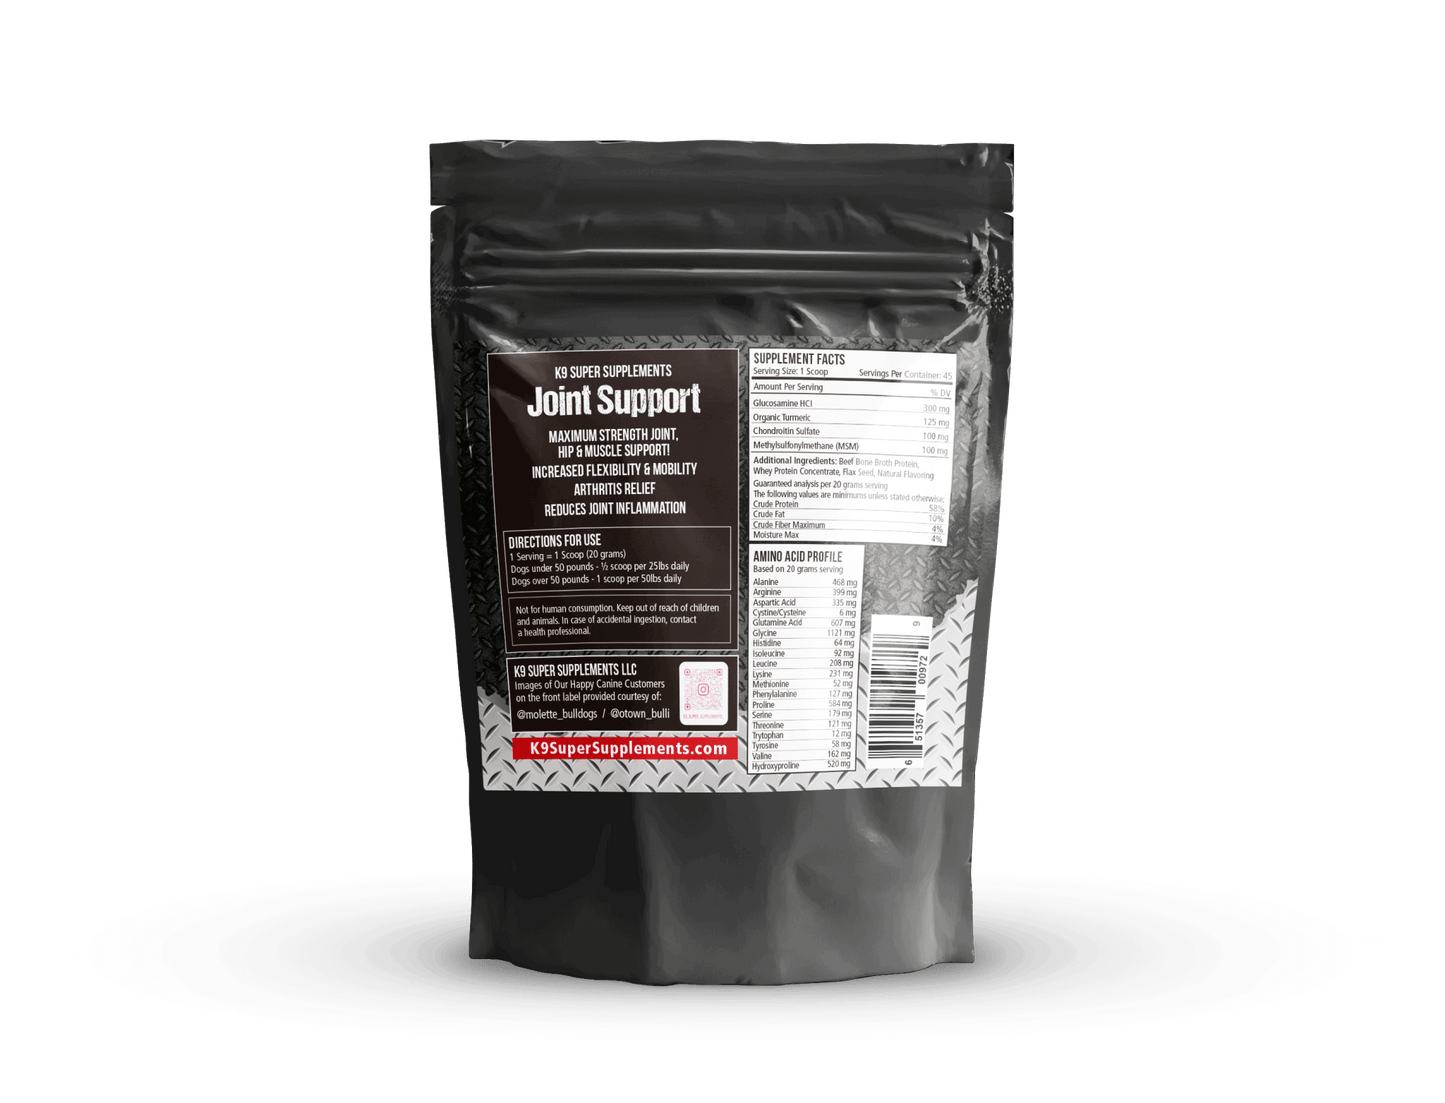 K9 Joint Support - 3 Lbs! - K9 Super Supplements